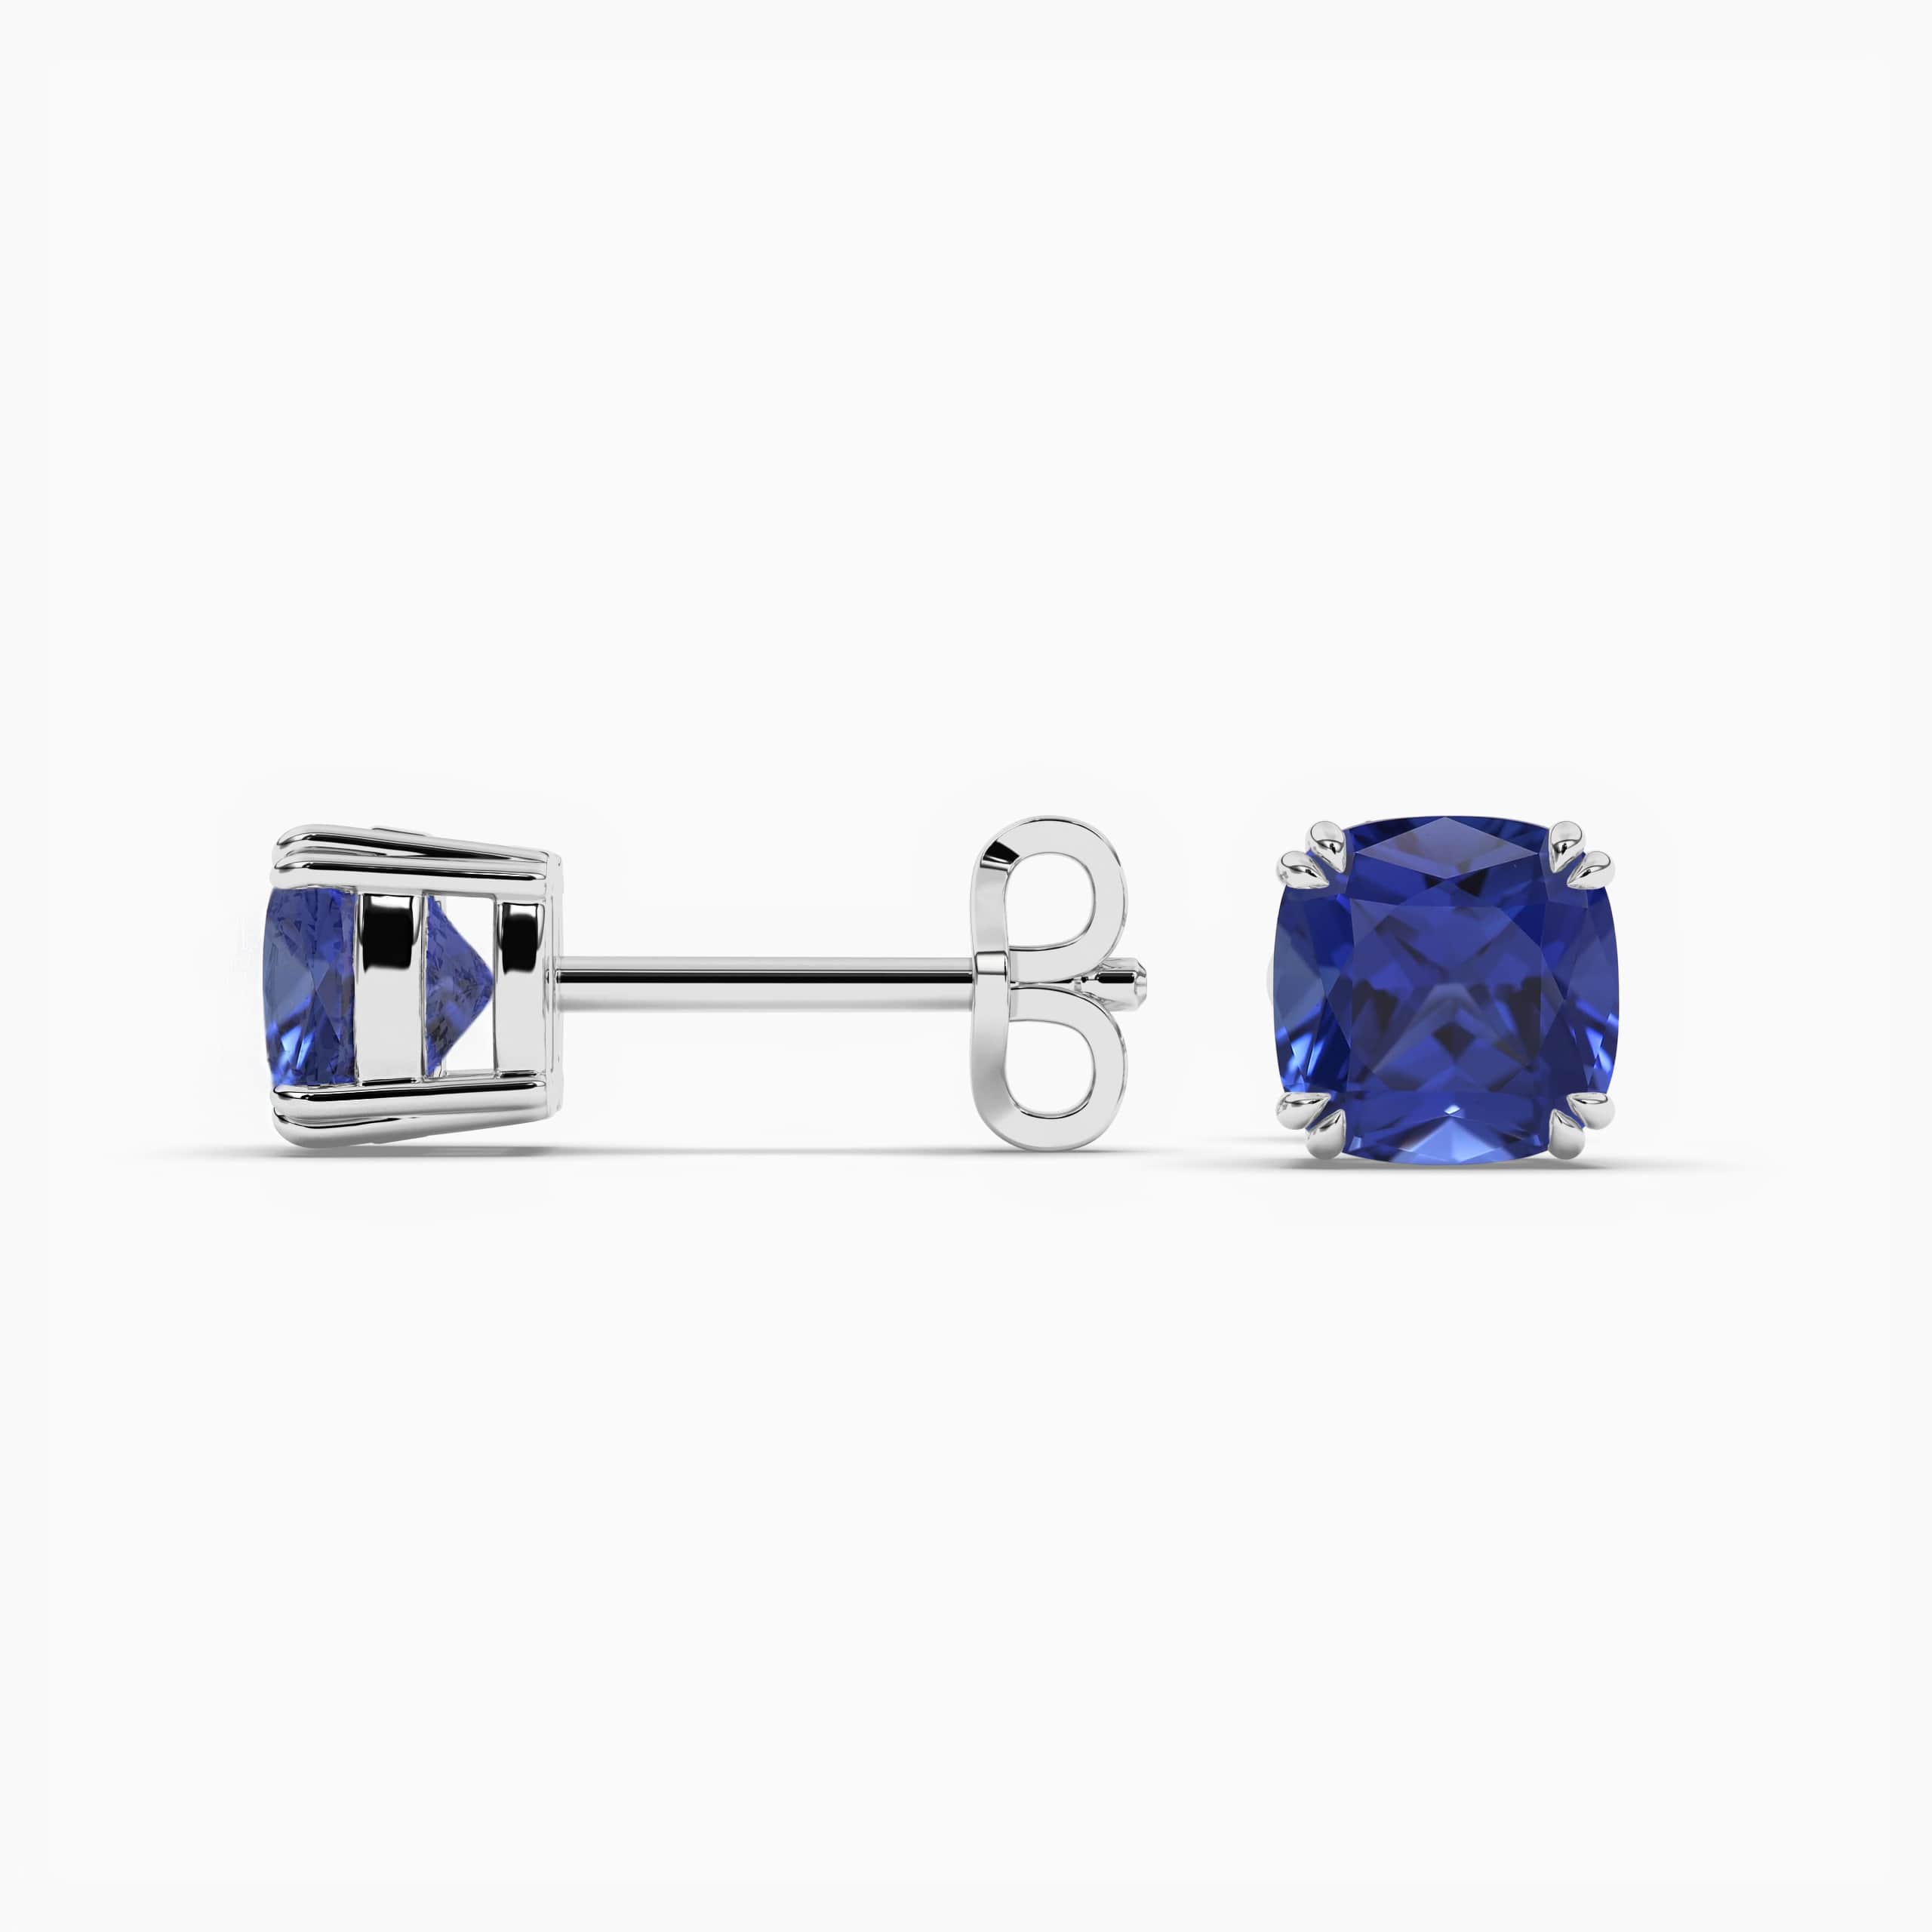 Blue Sapphire Solitaire Earrings in Sterling Silver 